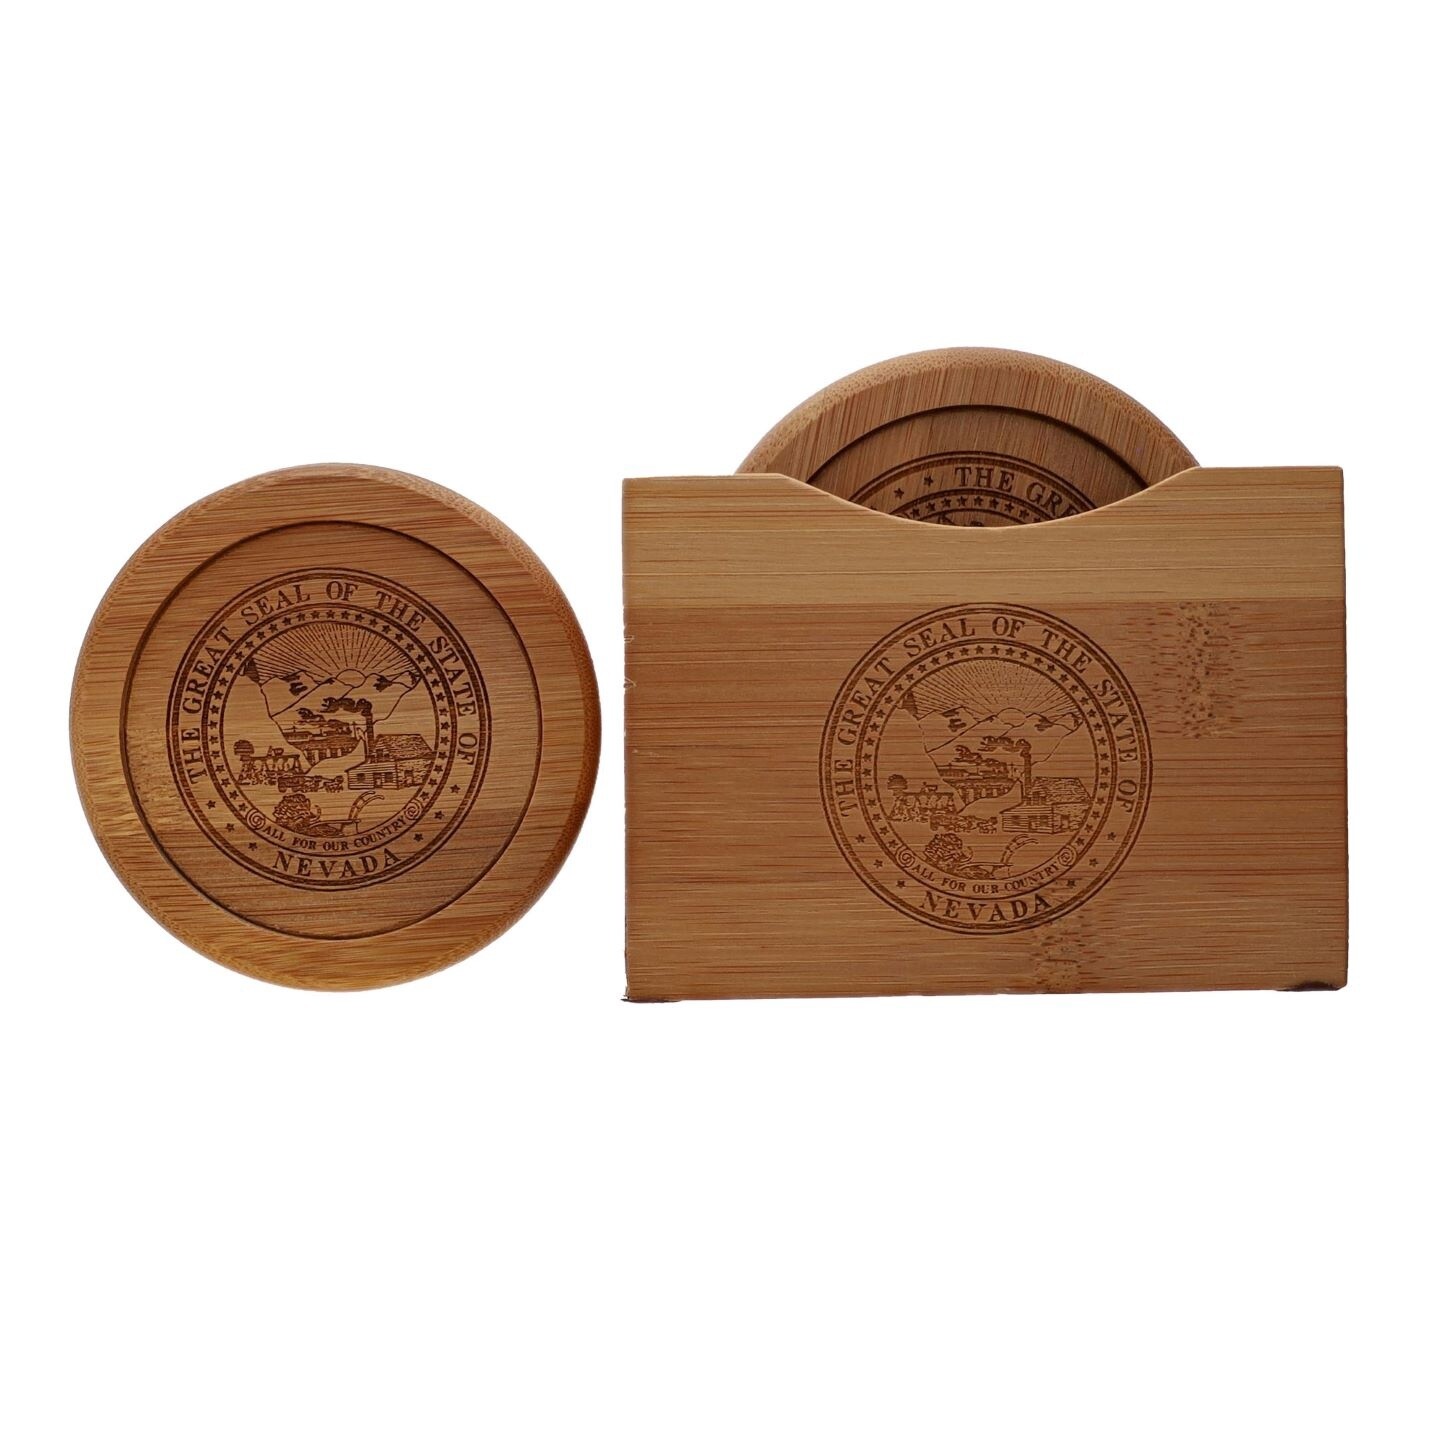 Bamboo Coaster Set with State Seal Bamboo 4 Piece